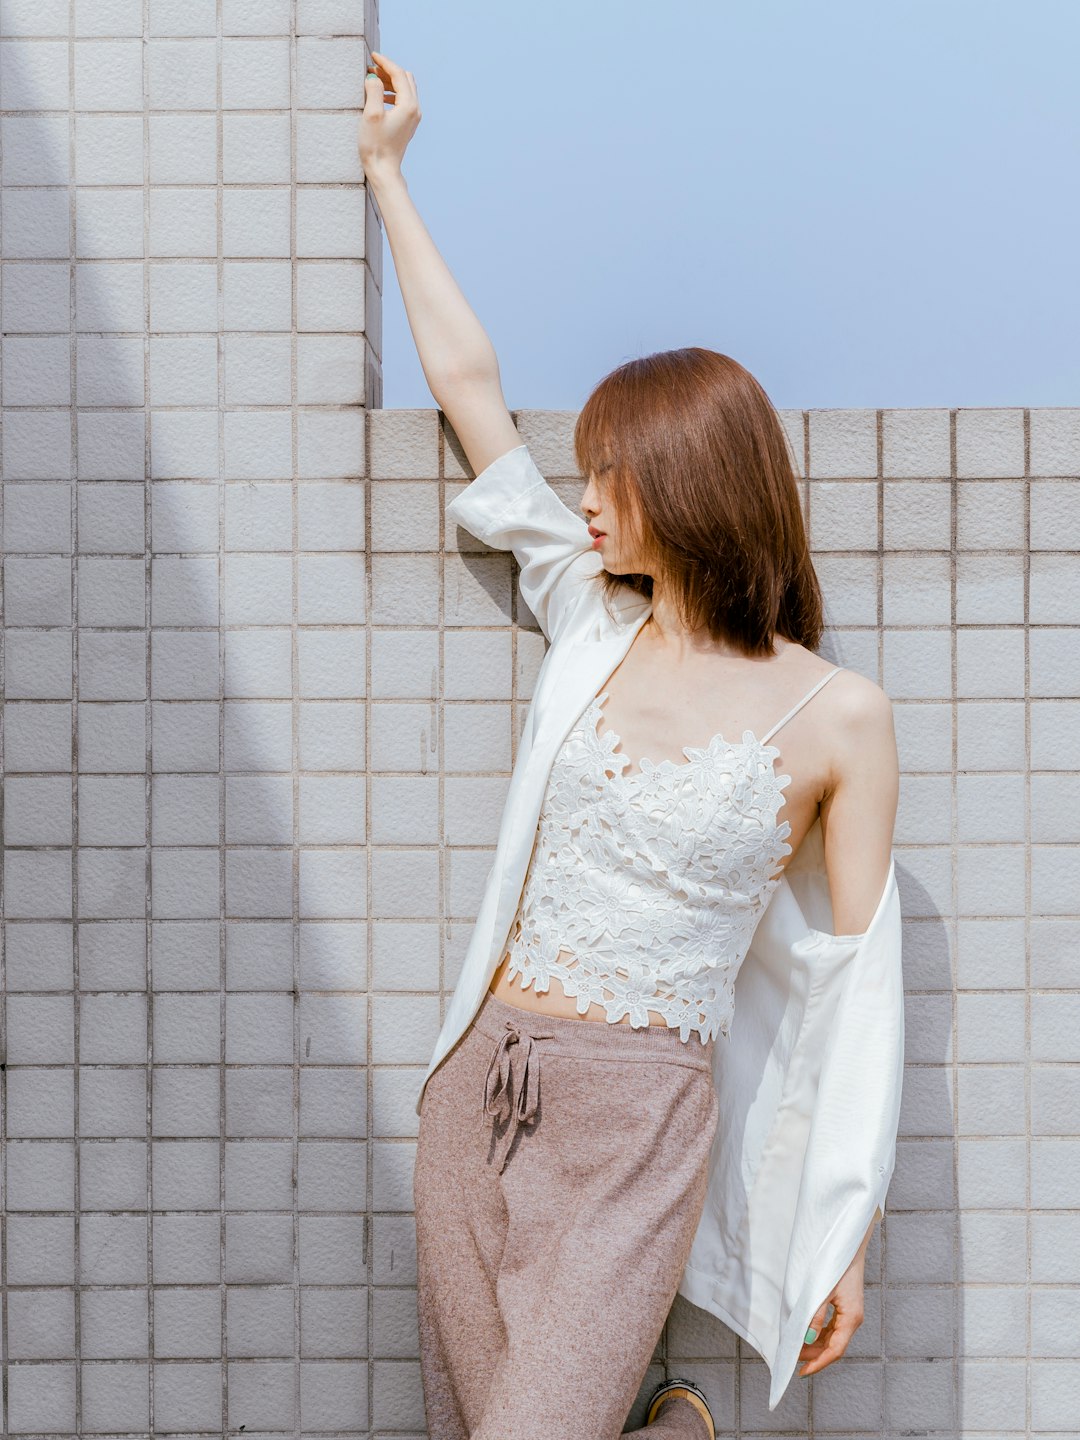 woman in white floral lace tank top and gray pants standing beside white concrete wall during